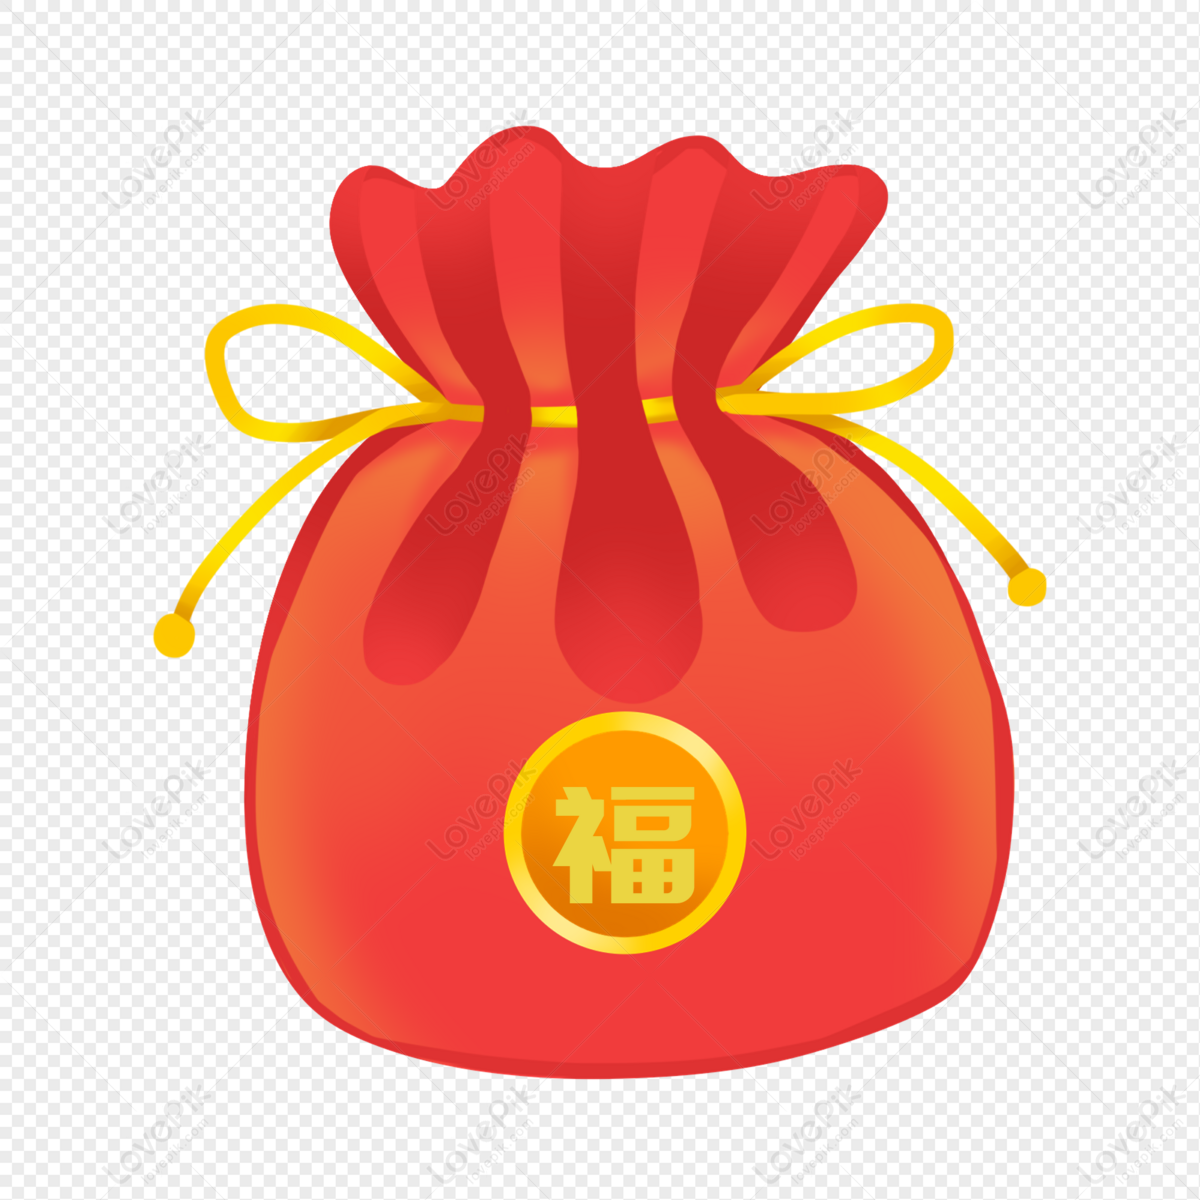 Fu Bag Red Envelope PNG Transparent Image And Clipart Image For Free ...